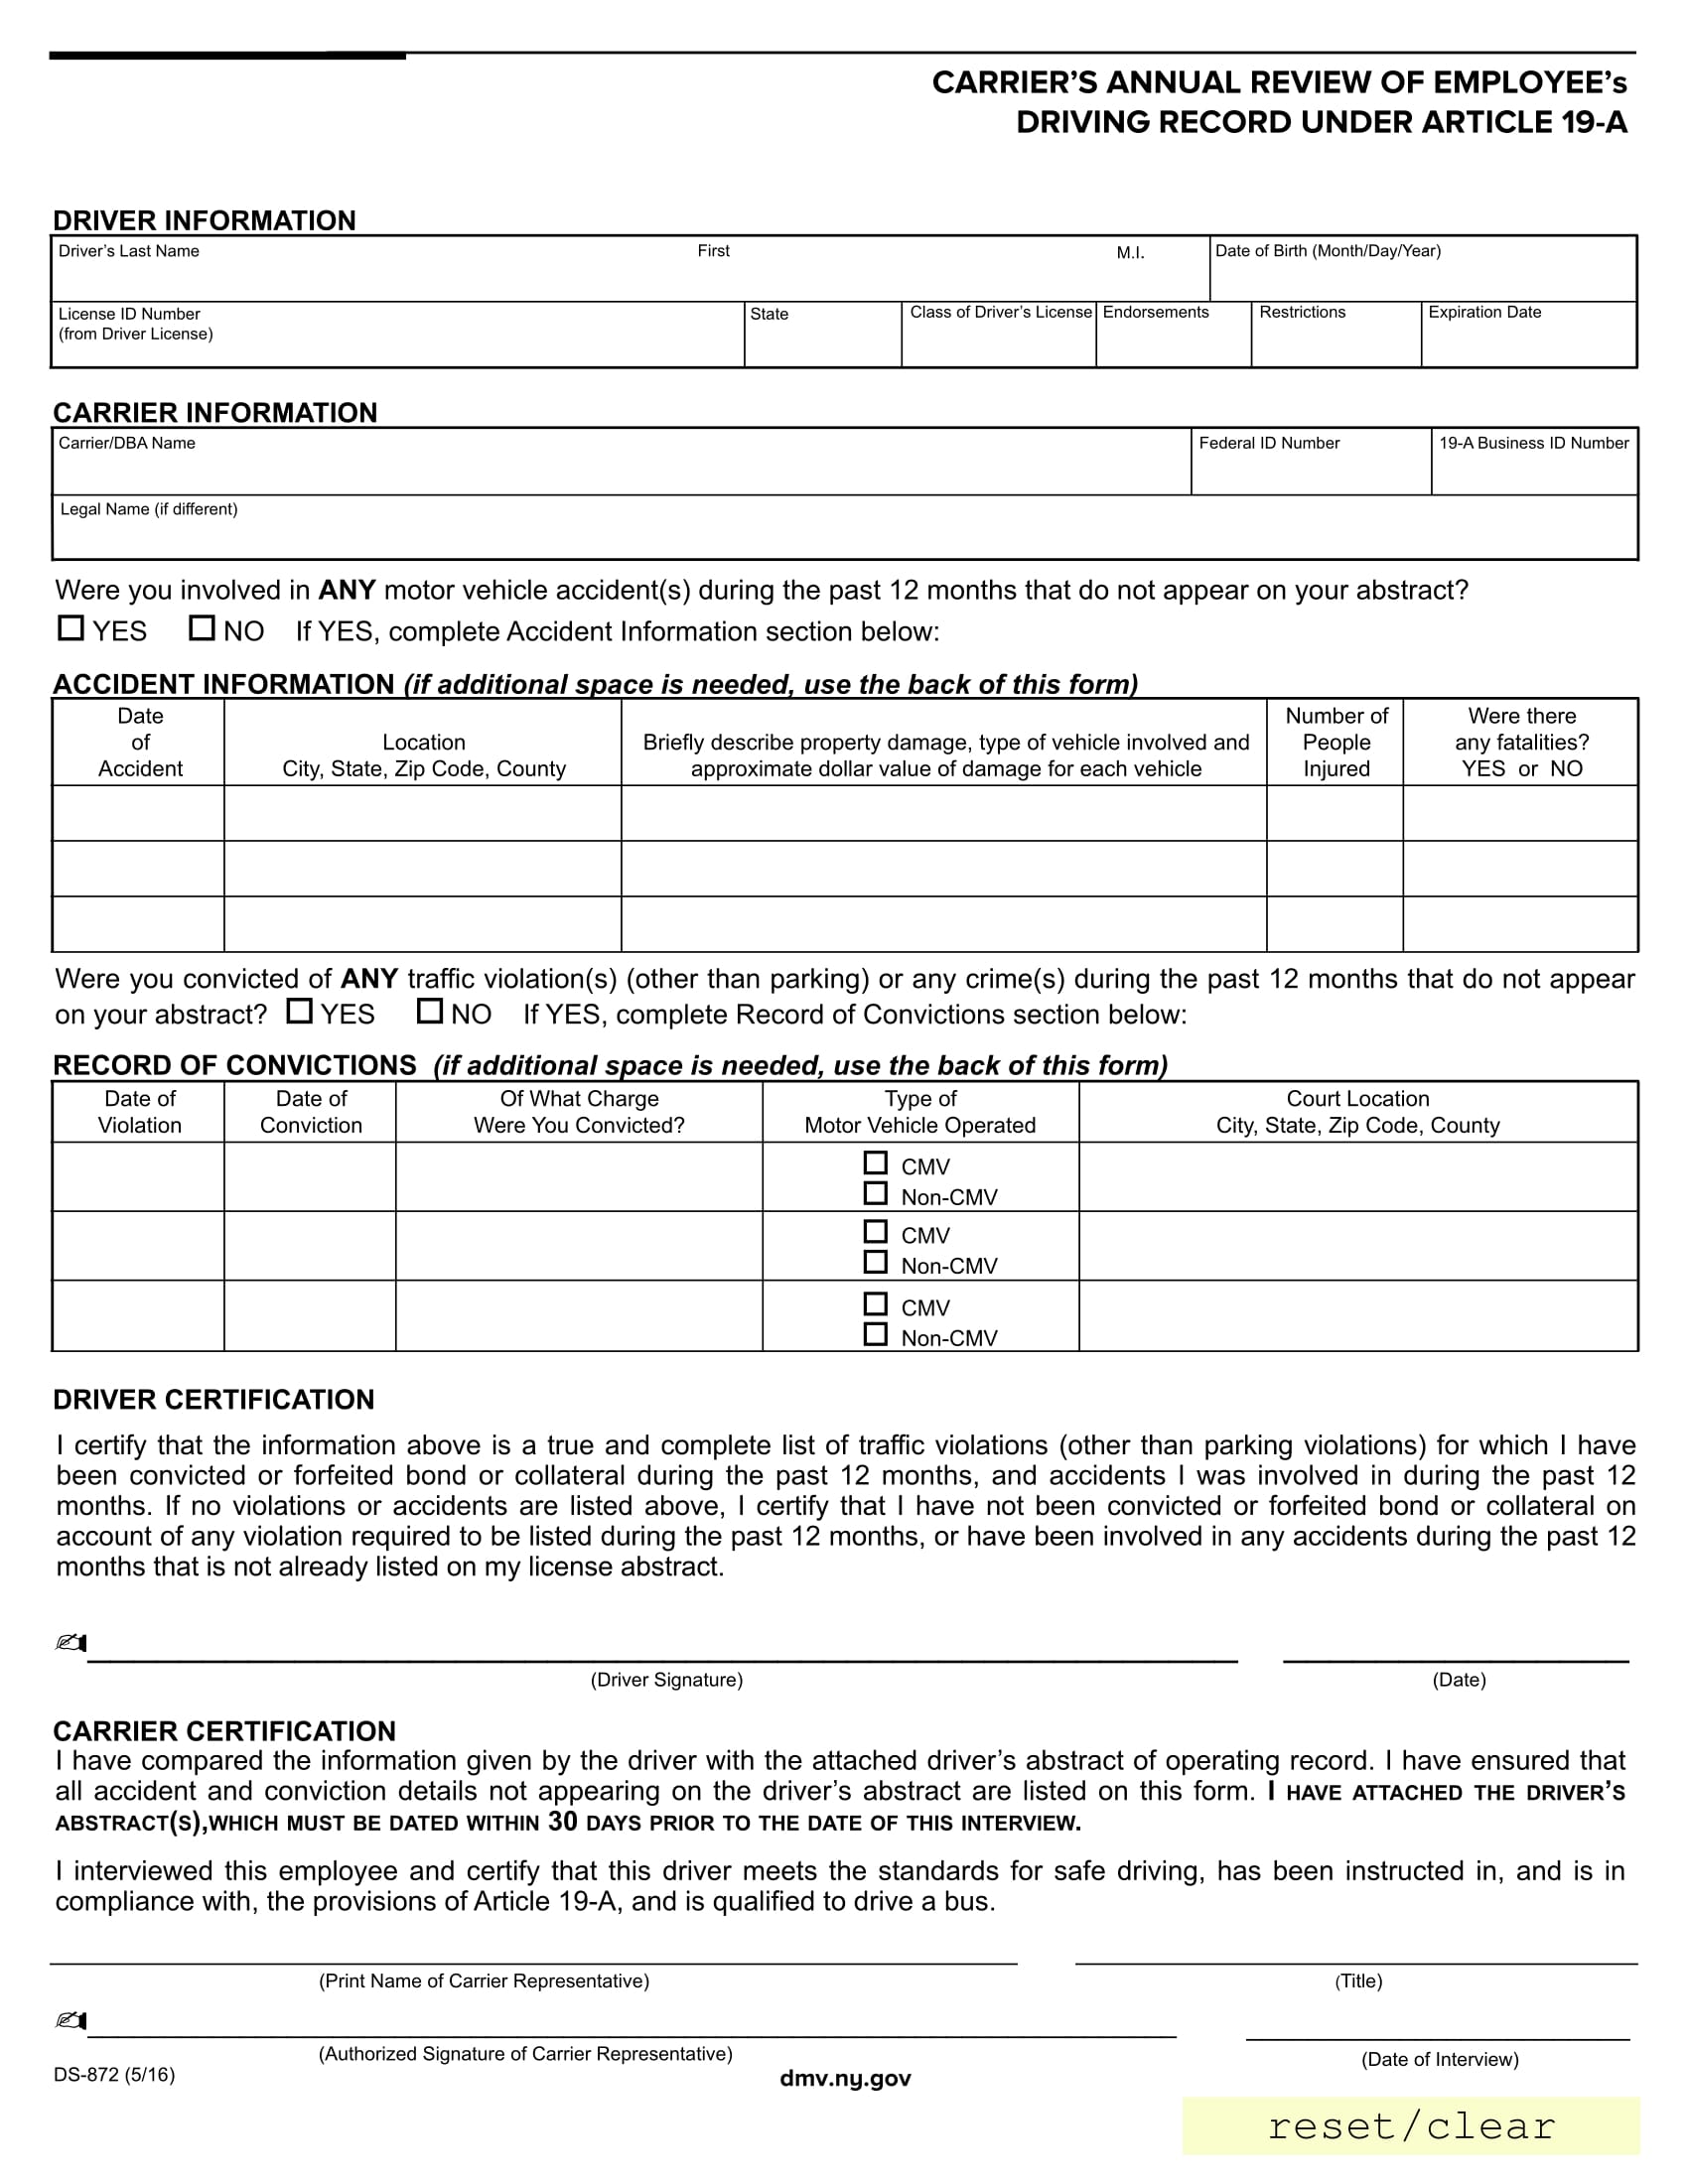 driver record review form 1